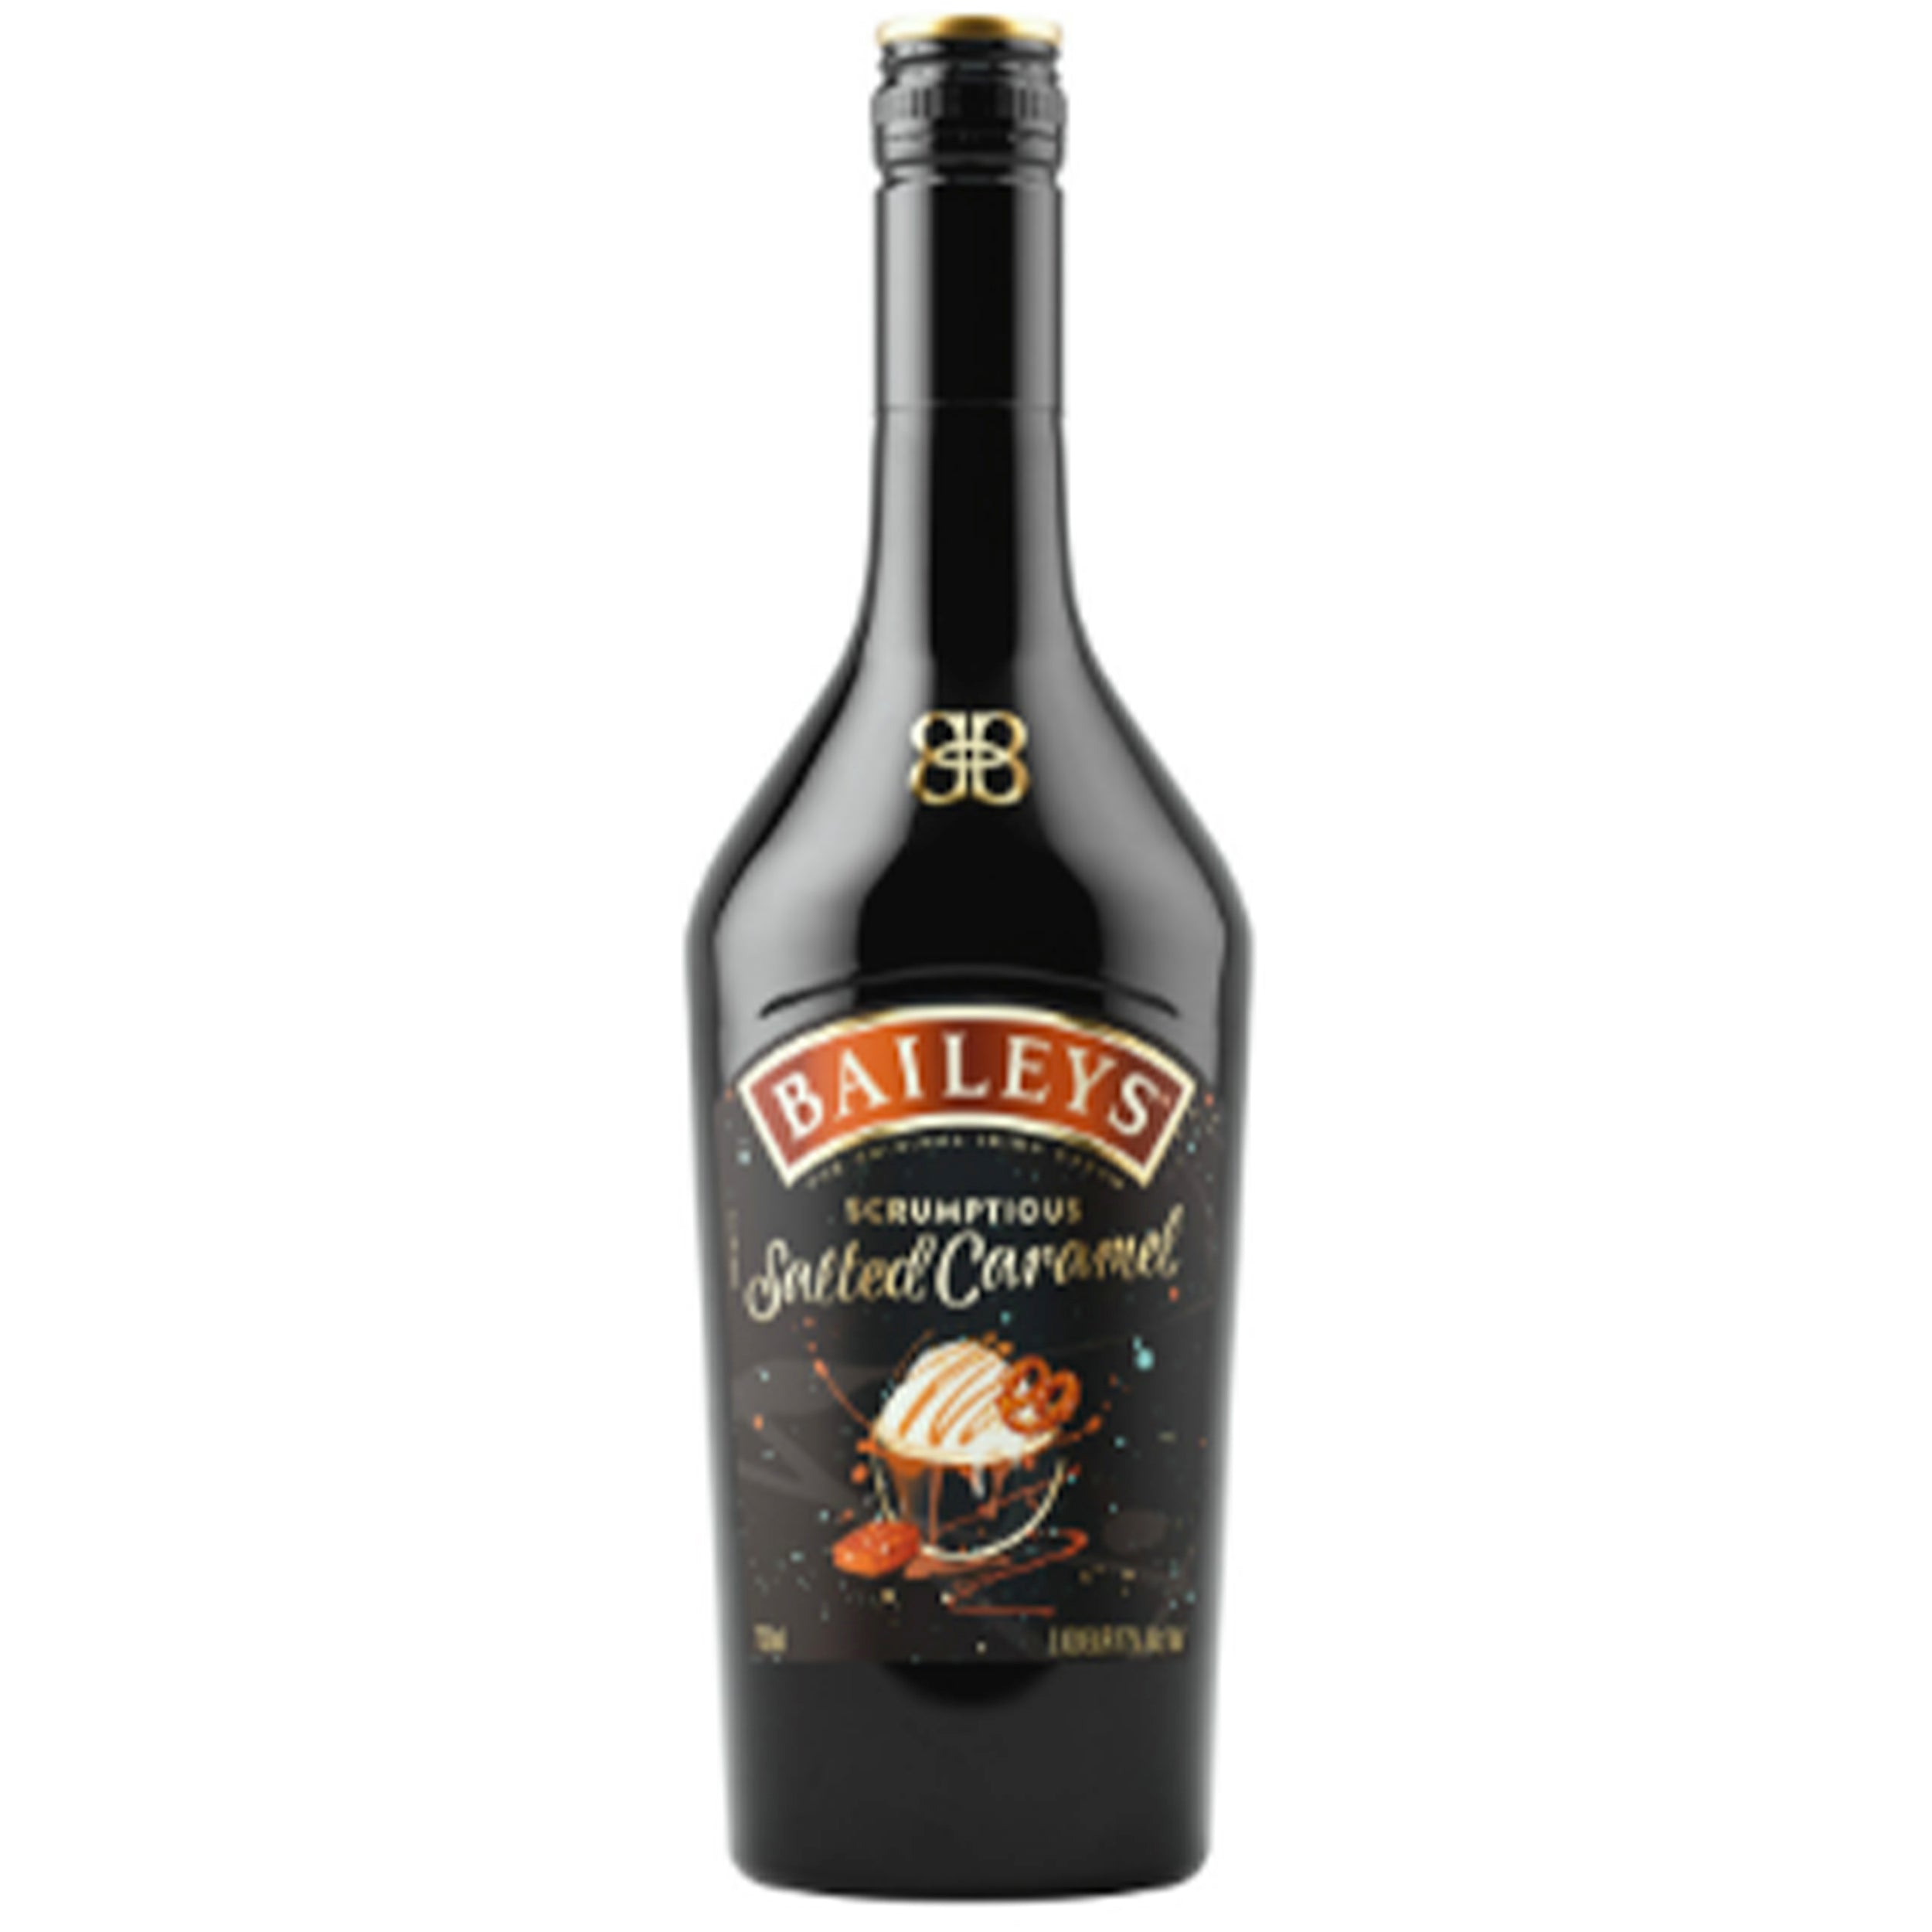 SEASON'S TREATINGS: BAILEYS ORIGINAL IRISH CREAM LIQUEUR BRINGS HOLIDAY  SPIRIT TO THE MOST WONDERFUL (AND DELICIOUS) TIME OF THE YEAR